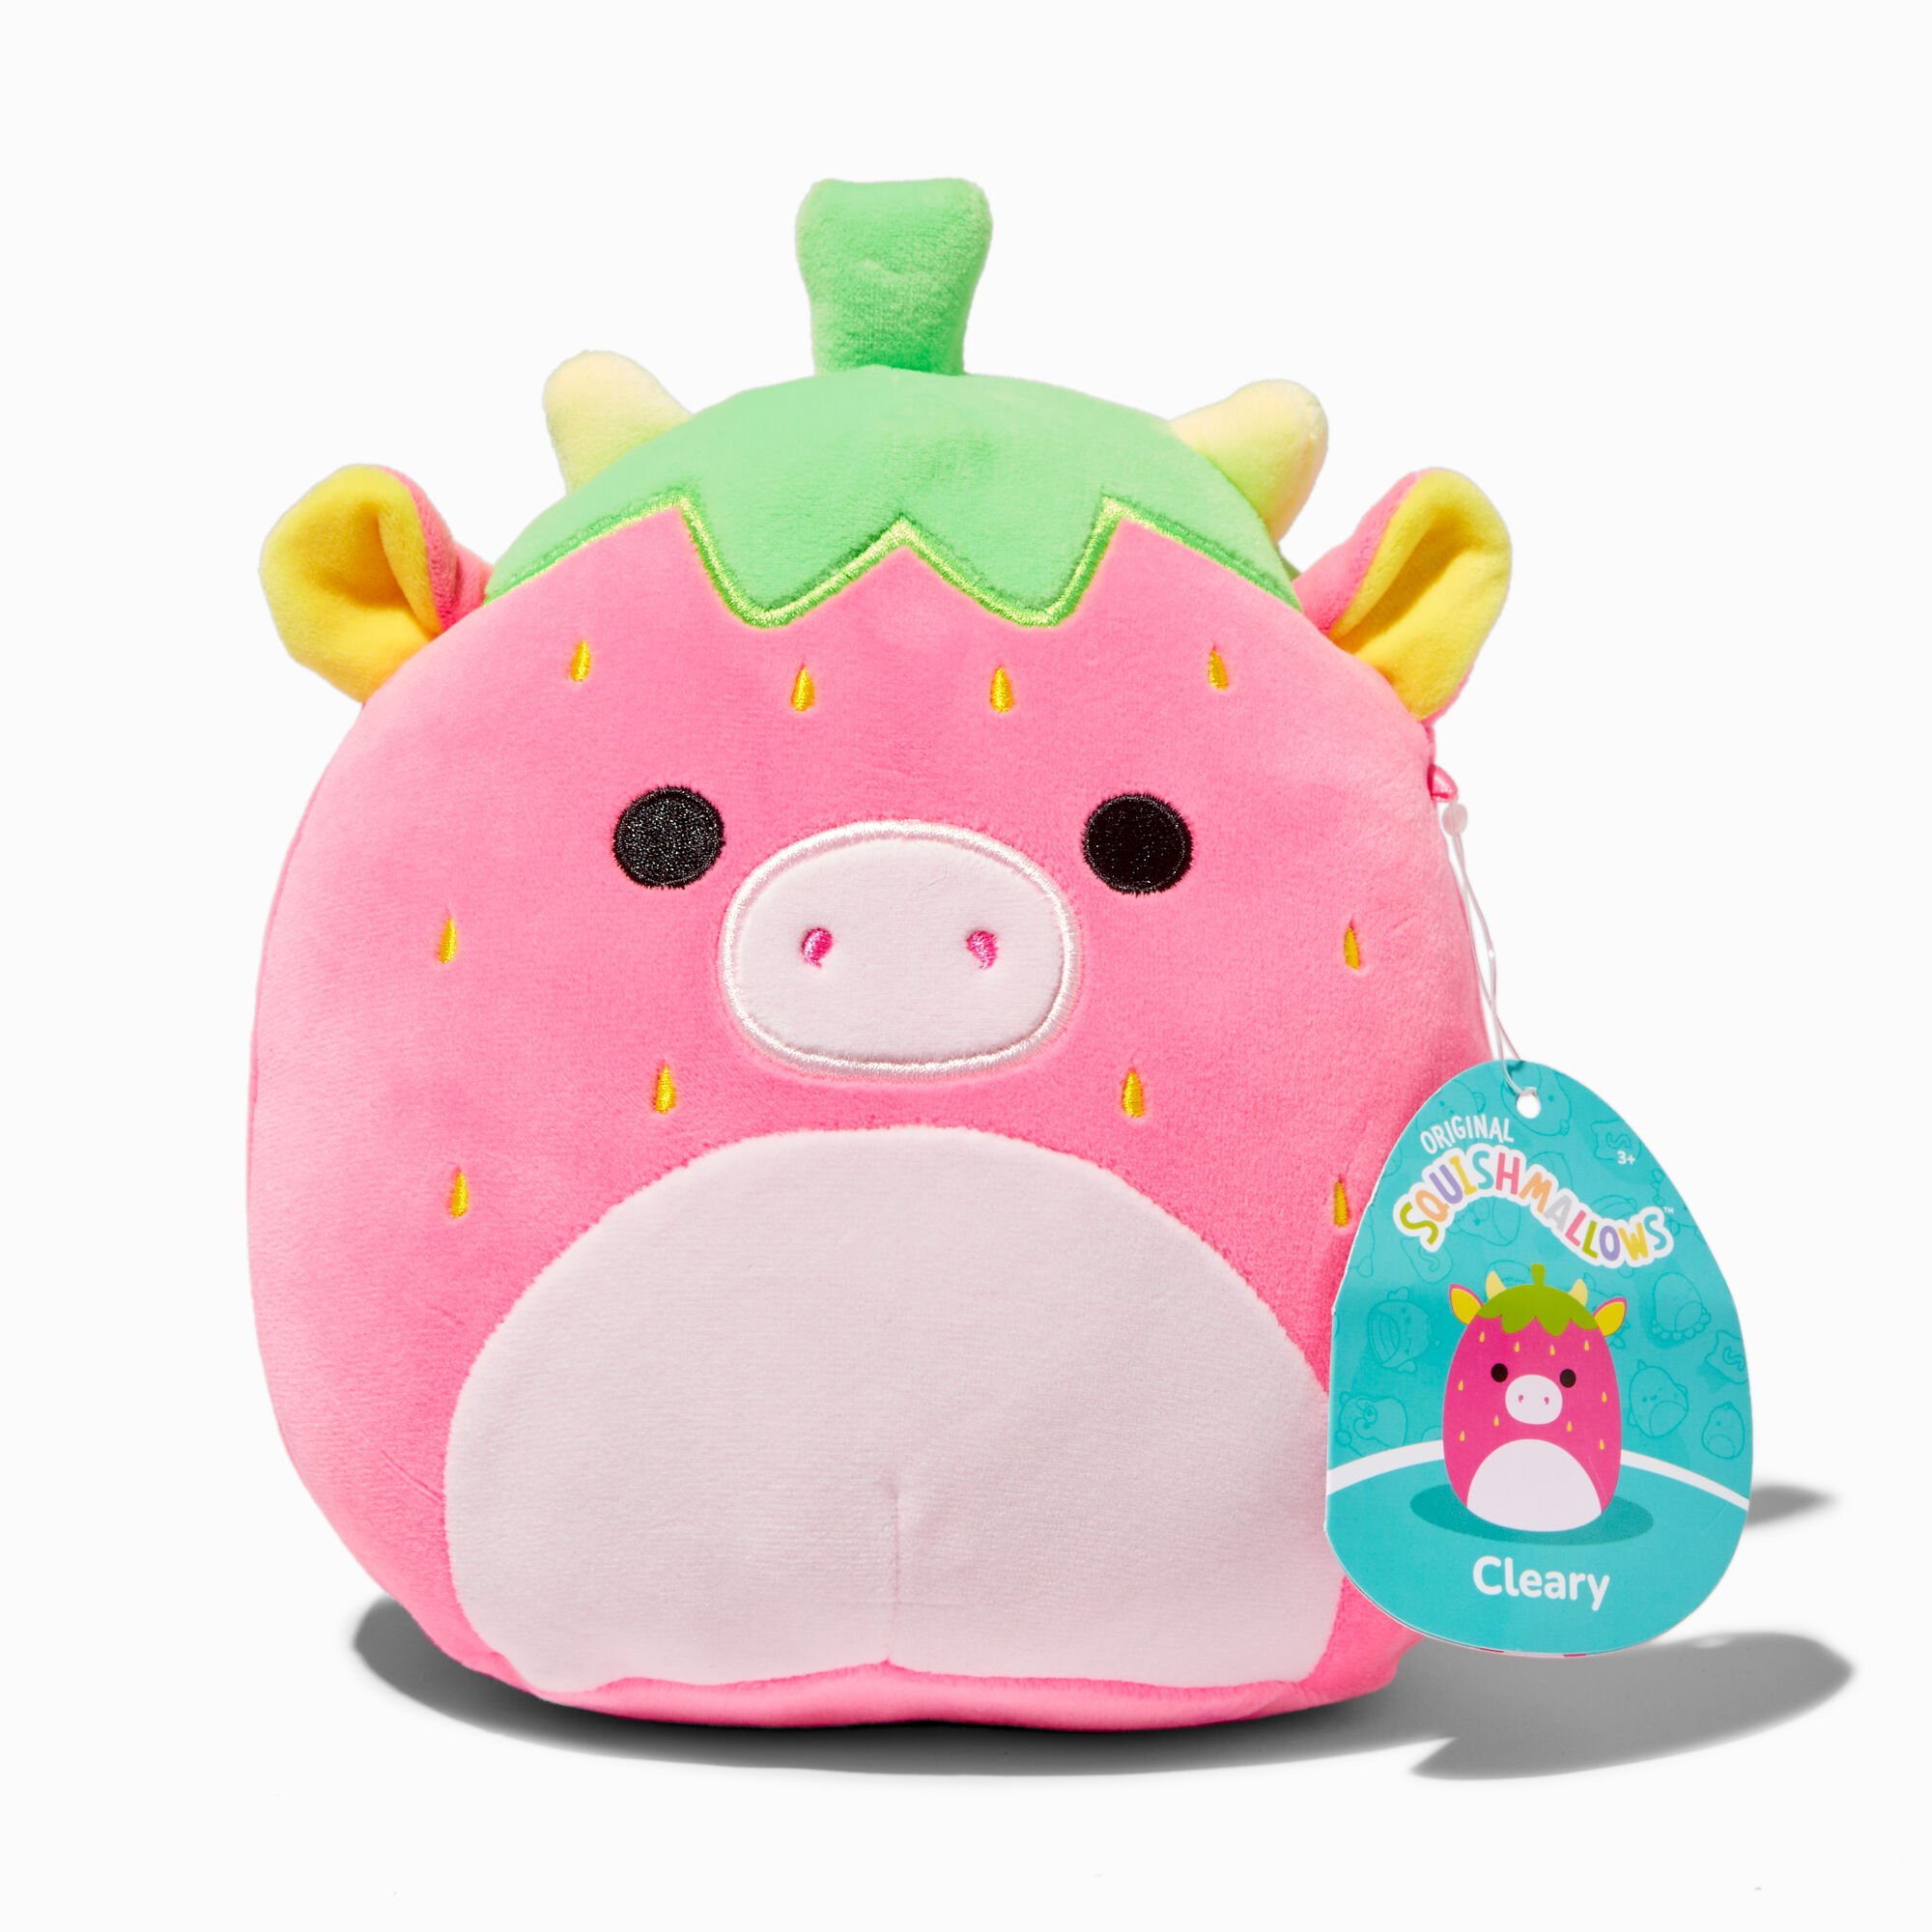 View Claires Squishmallows 8 Cleary Soft Toy information